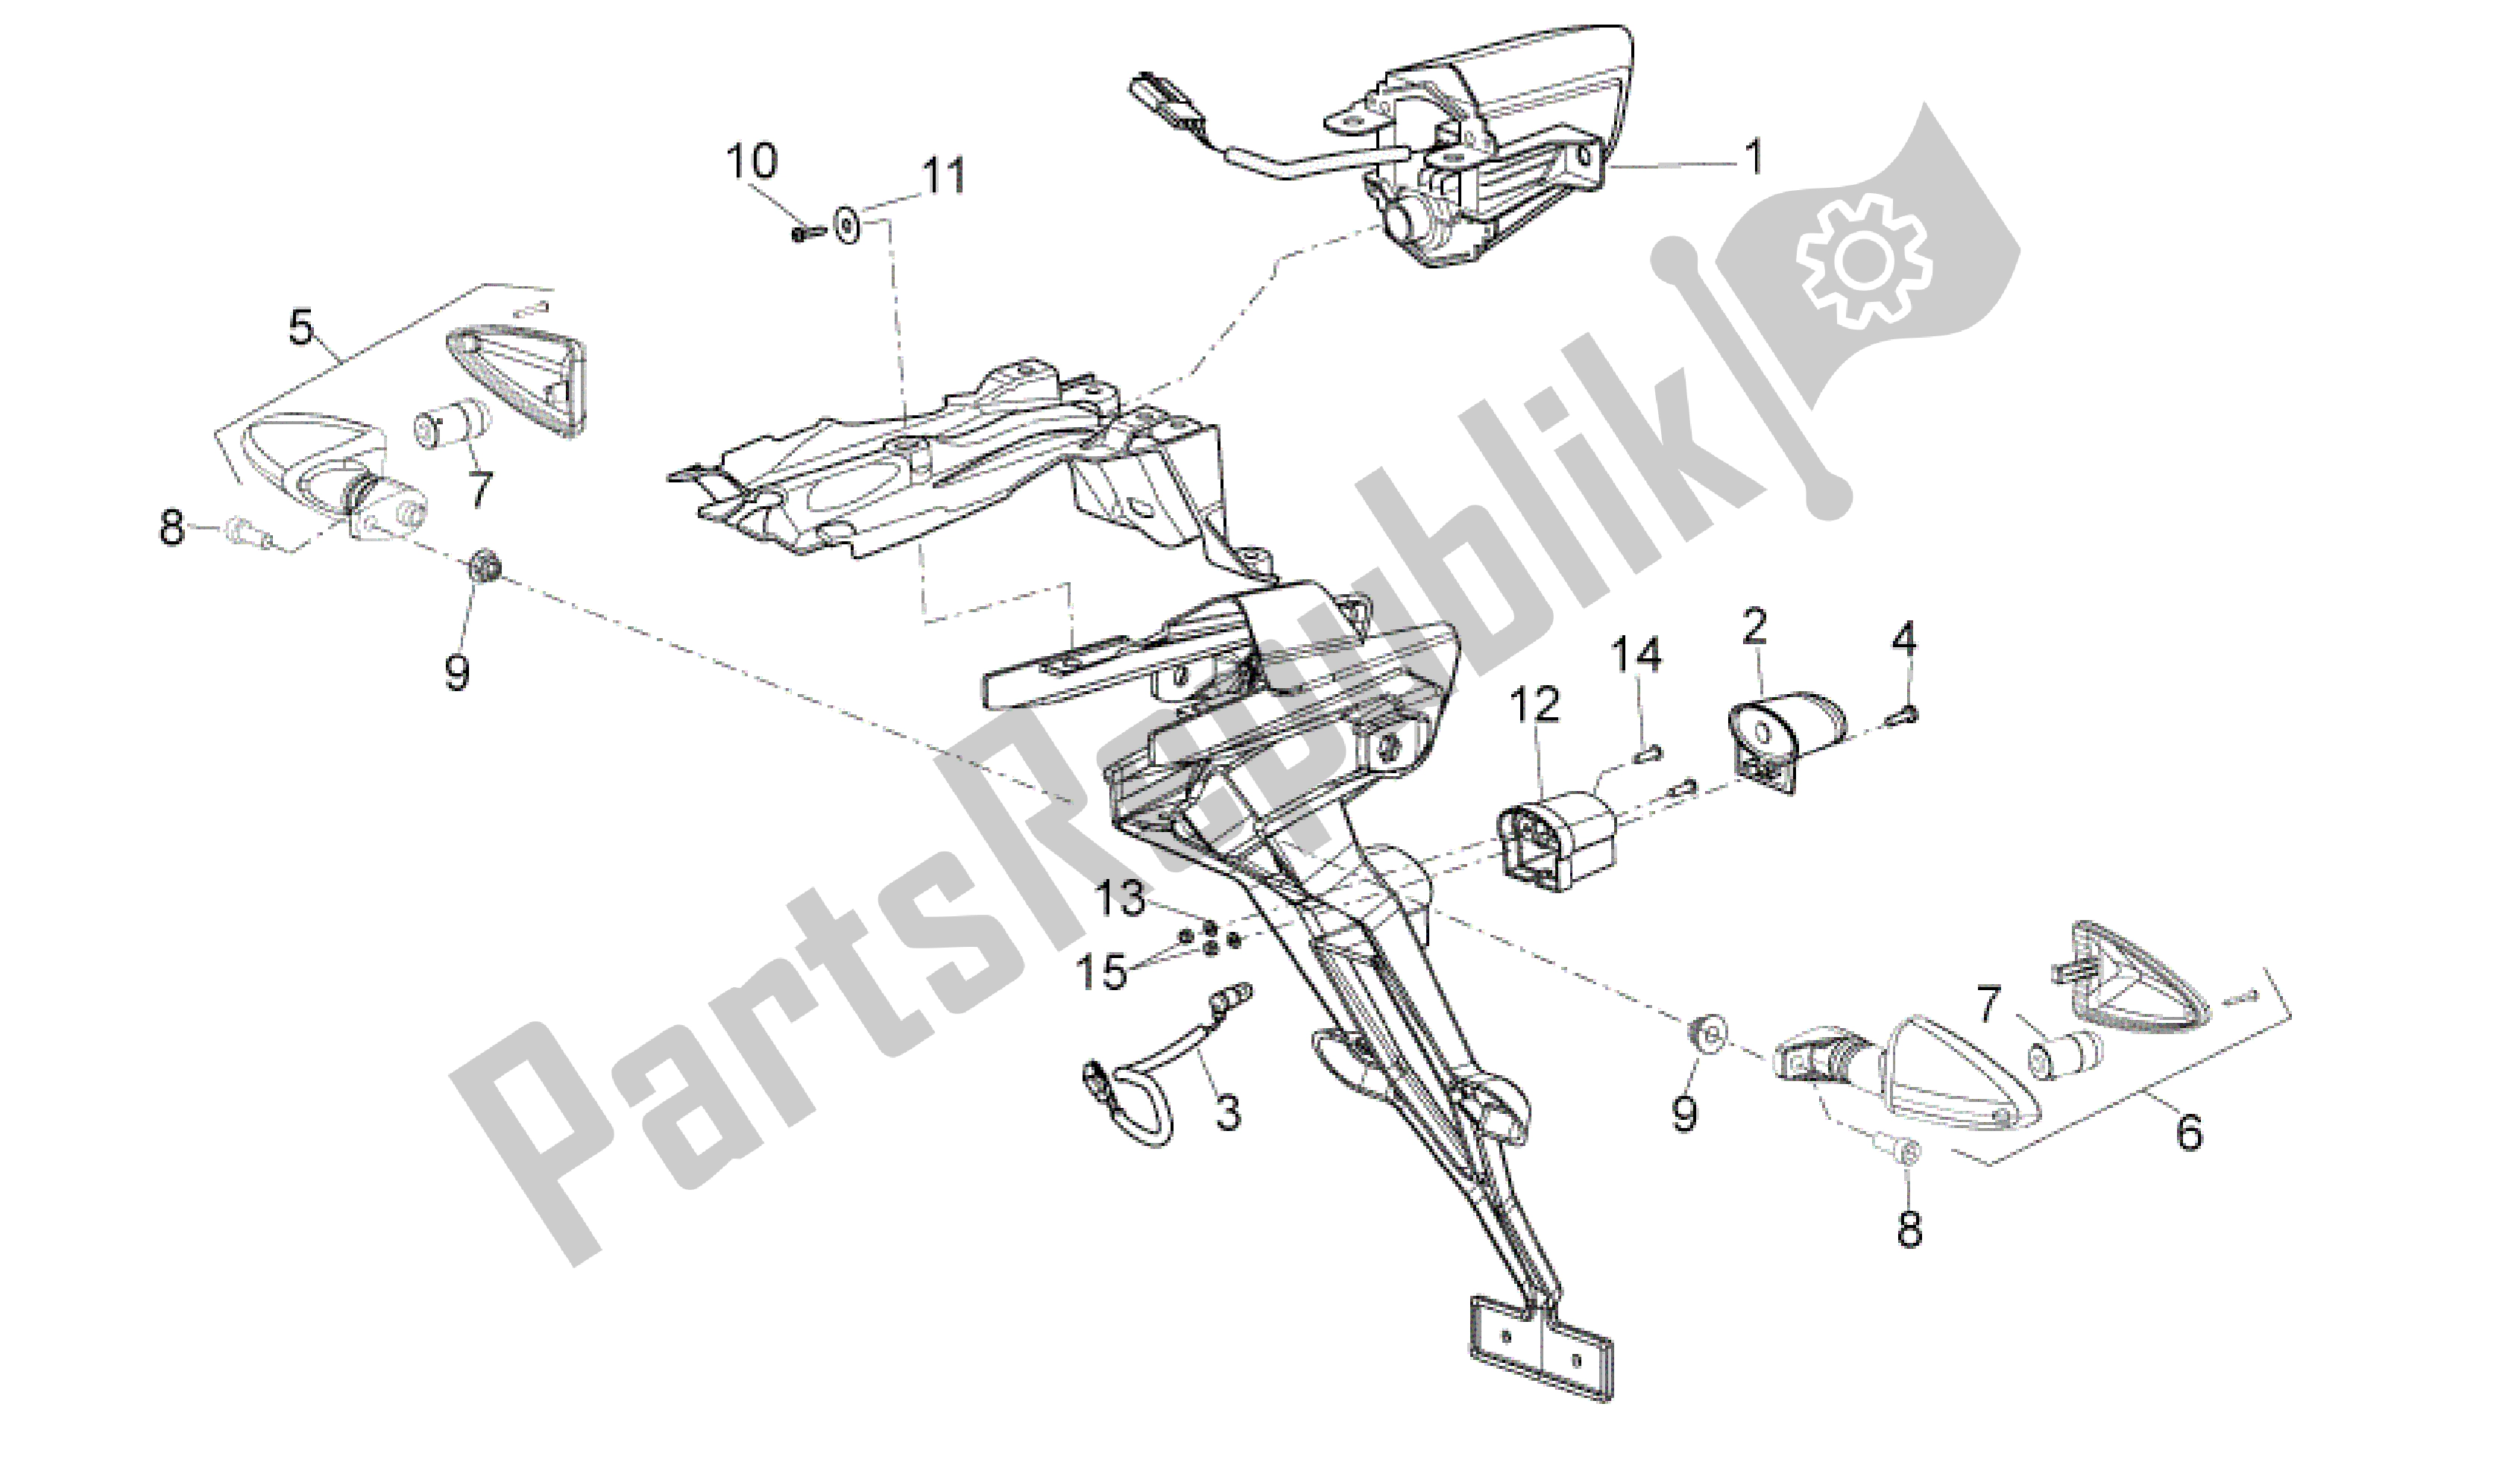 All parts for the Rear Lights of the Aprilia SXV 450 2009 - 2011